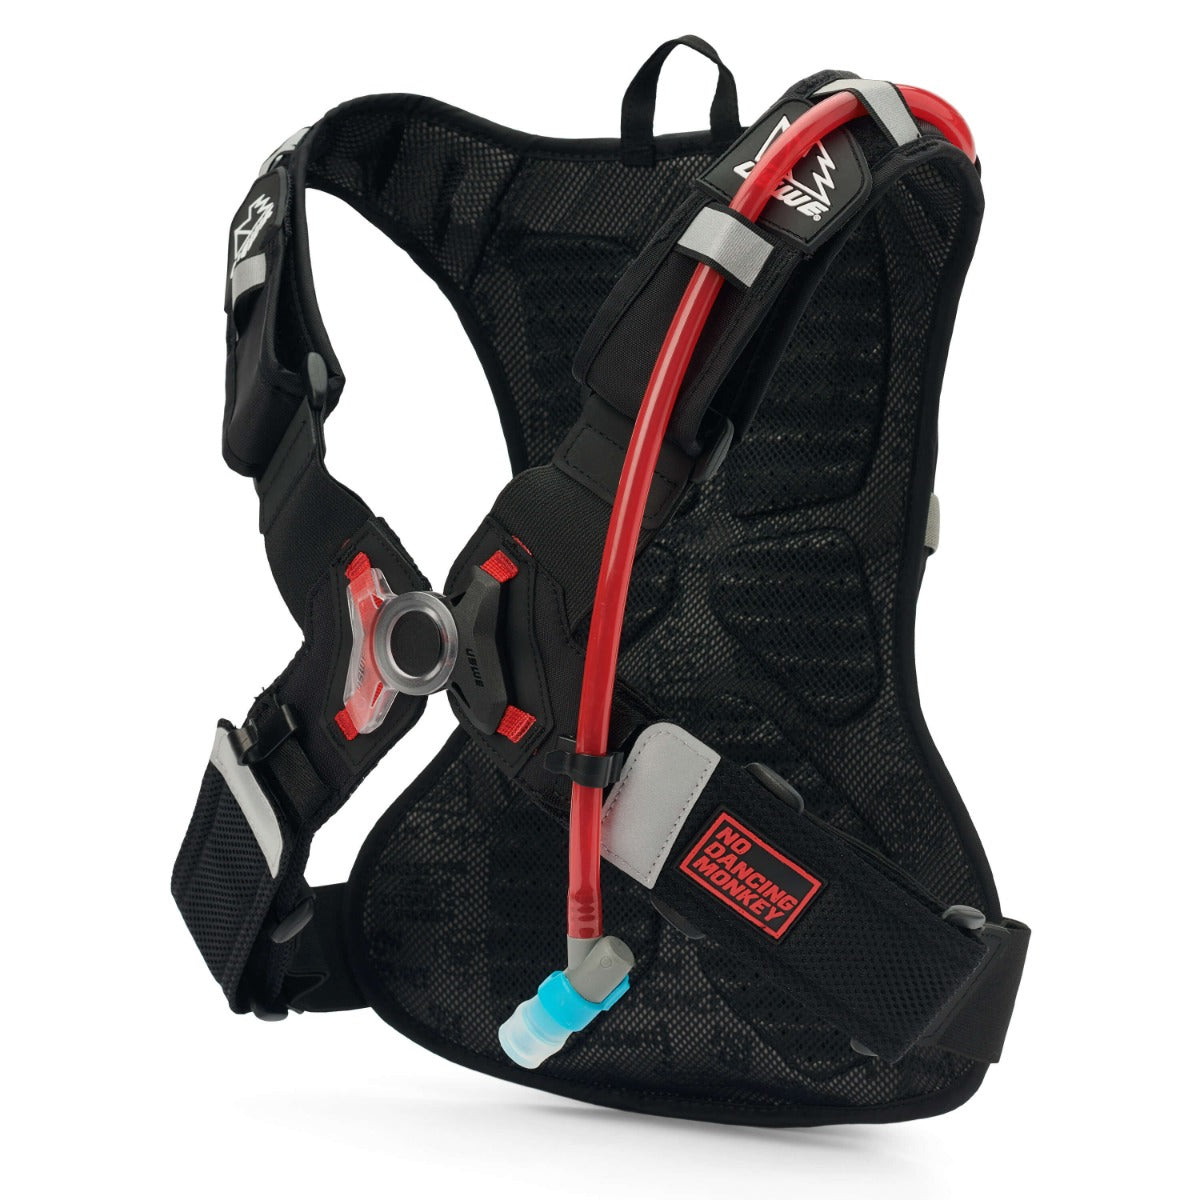 USWE RAW 4 Hydration Backpack Black Grey – With 3 Litre Bladder